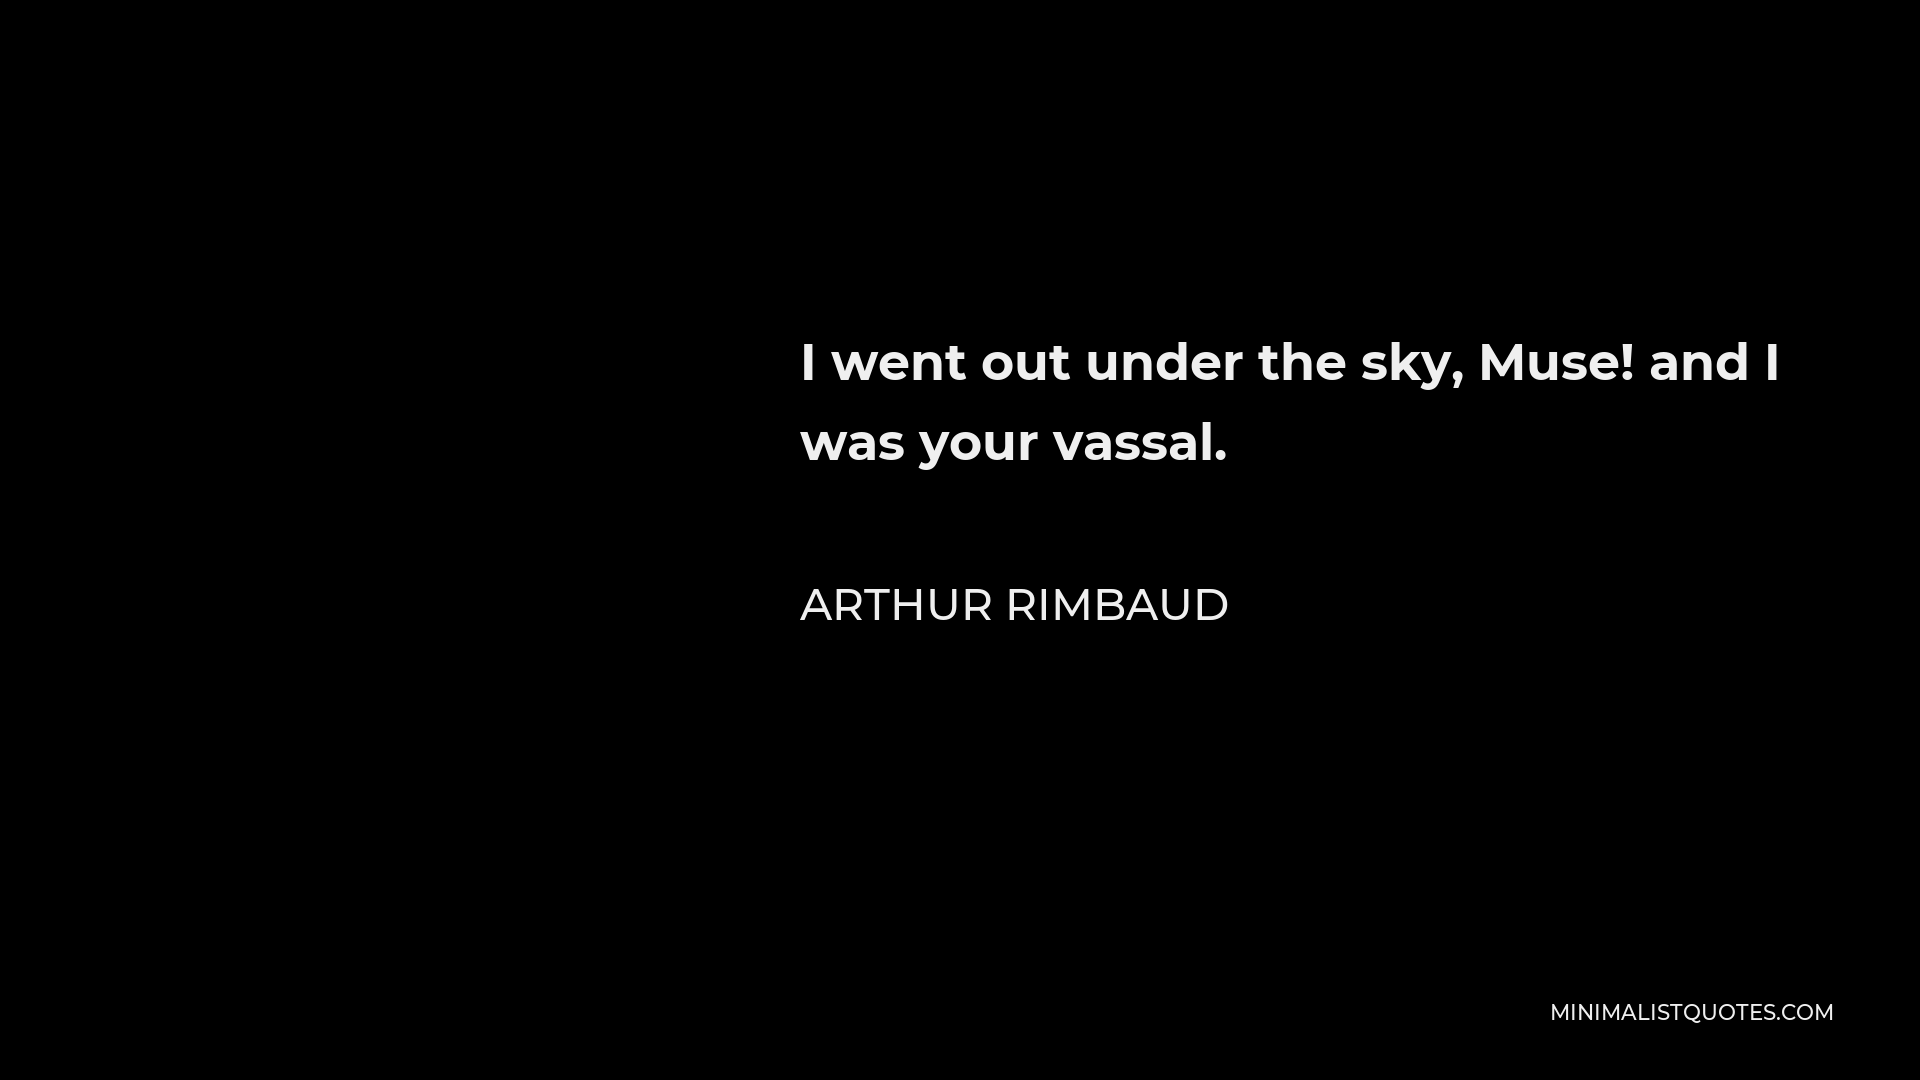 Arthur Rimbaud Quote - I went out under the sky, Muse! and I was your vassal.